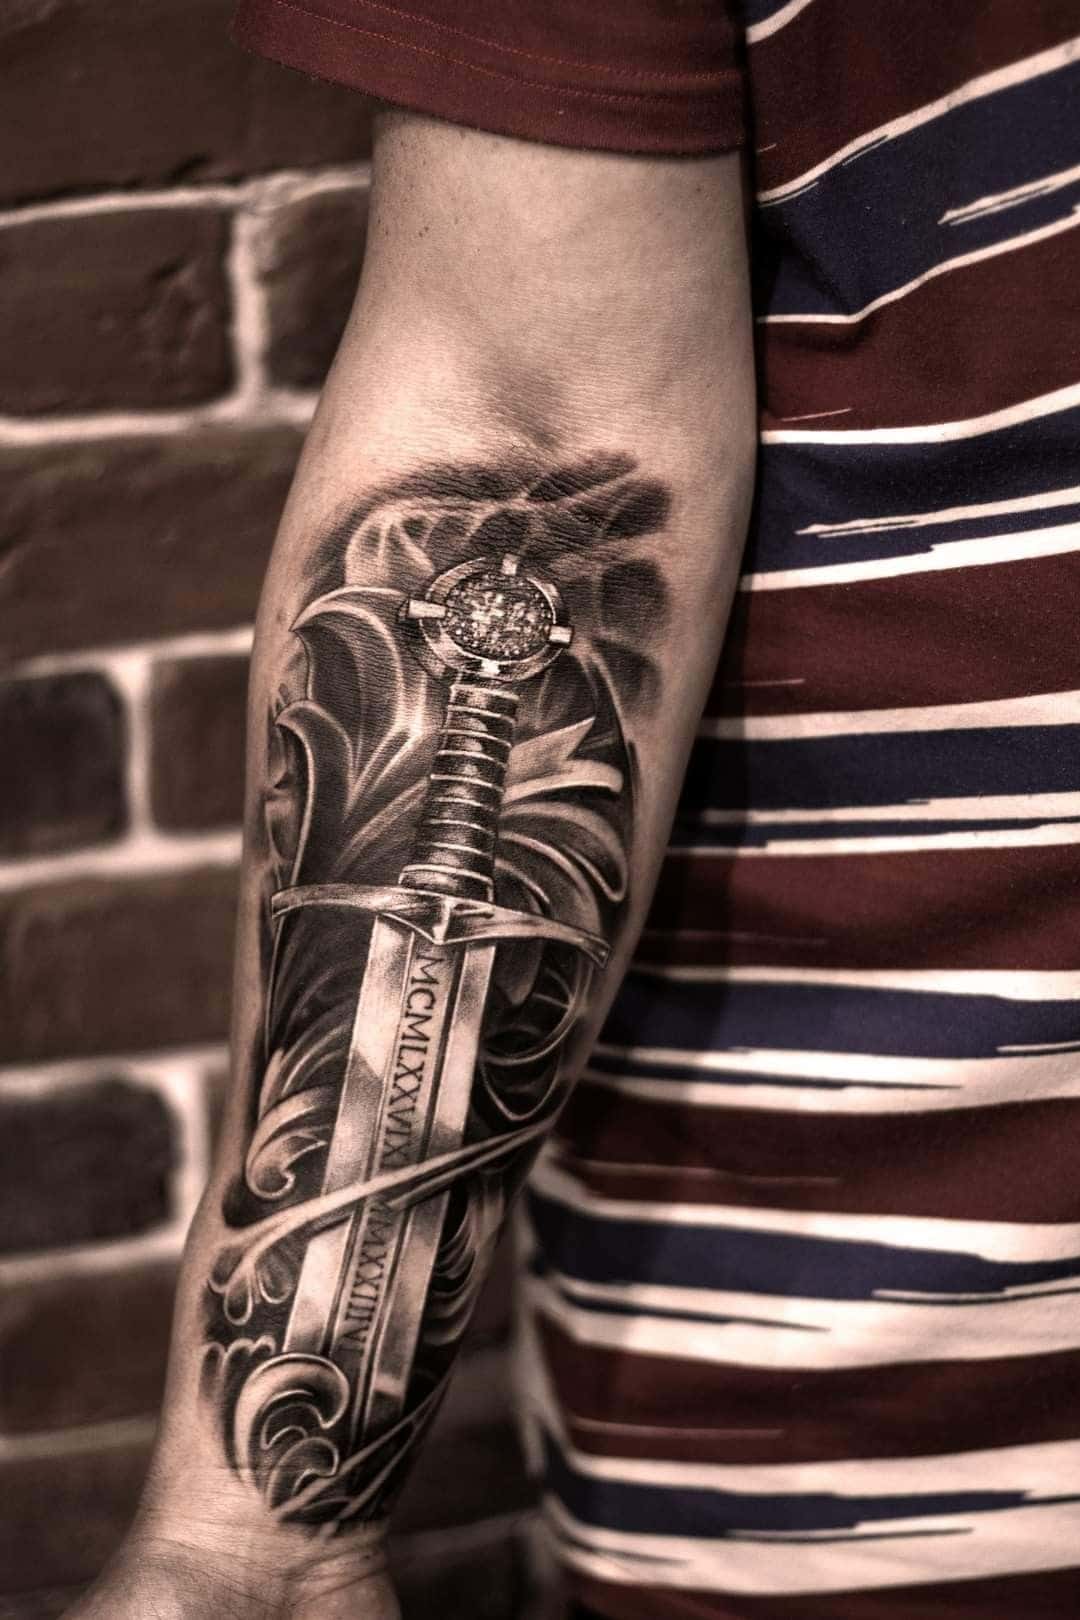 150+ Sword Tattoos: Show Your Fearless Spirit And Resilience